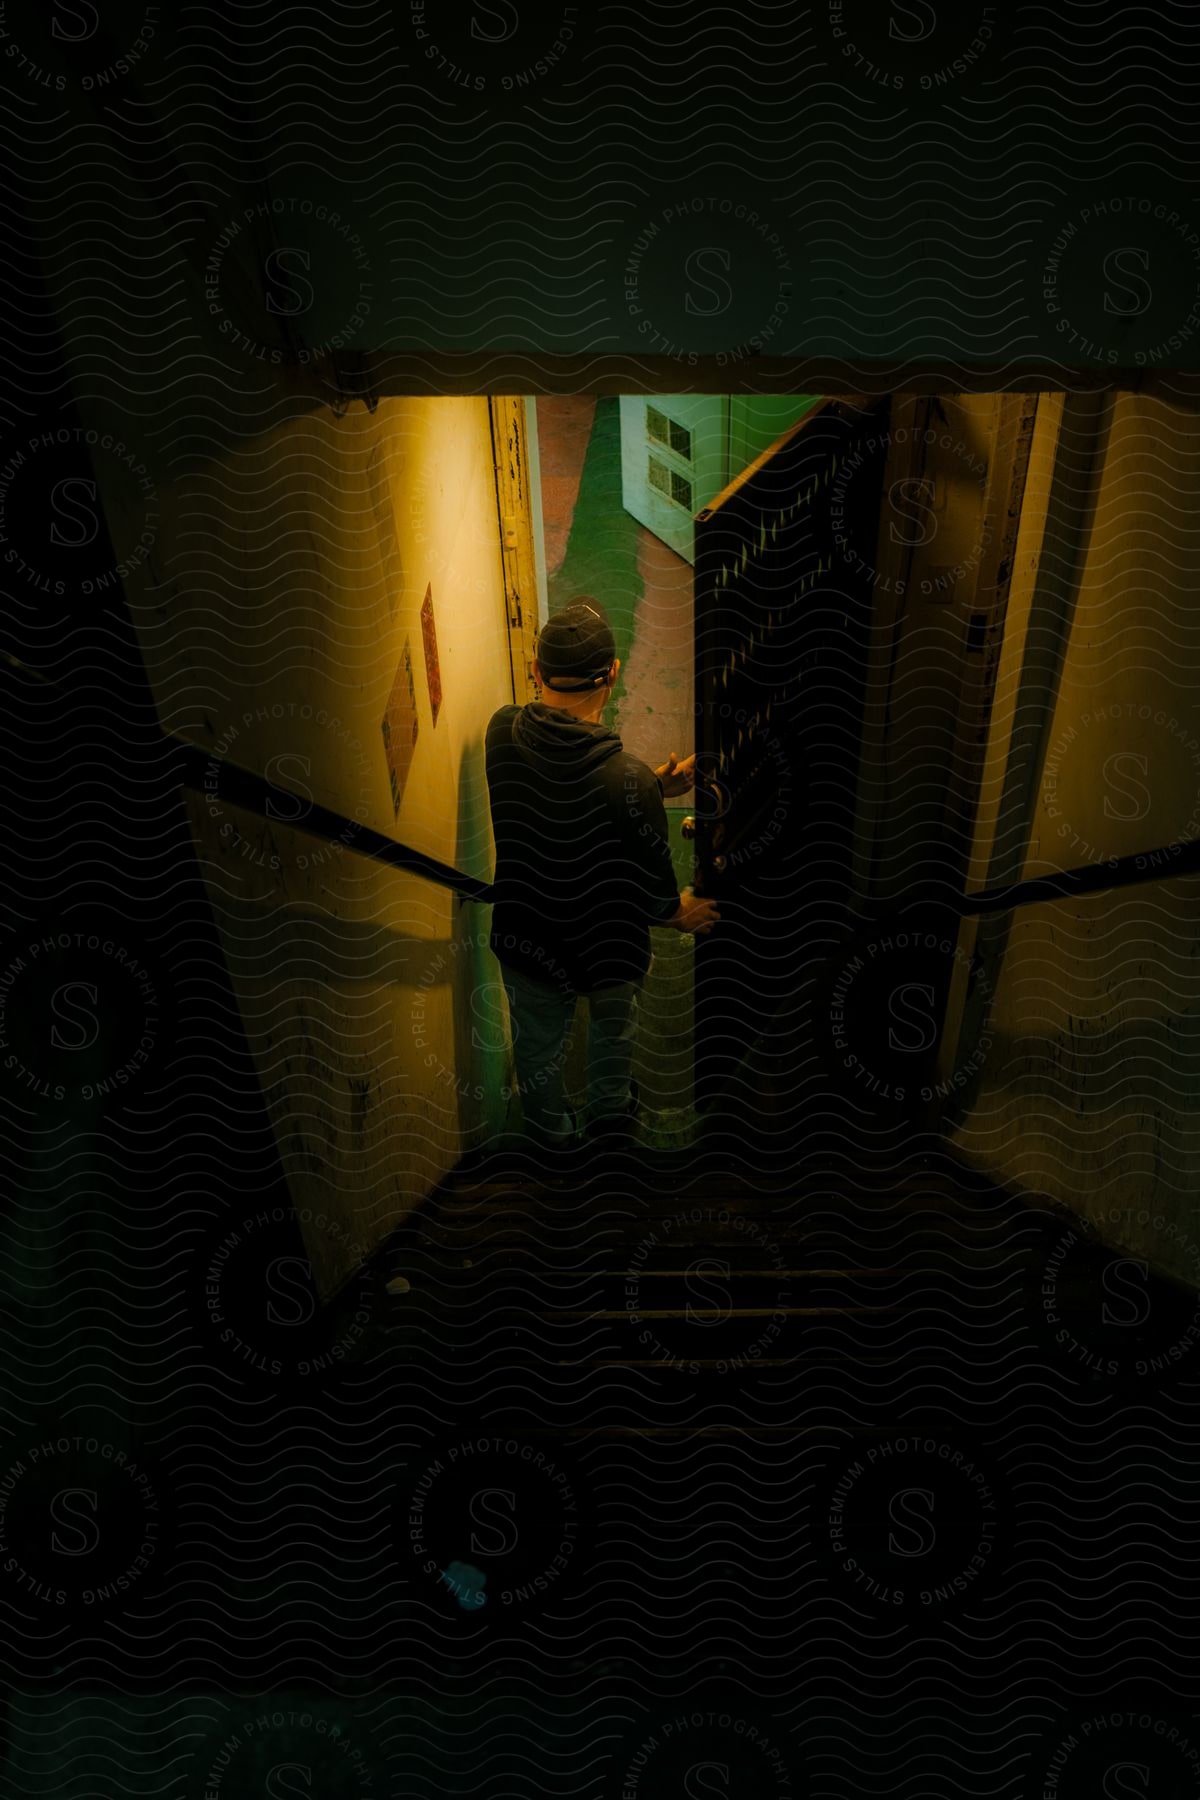 A man opens a door at the bottom of a dark staircase